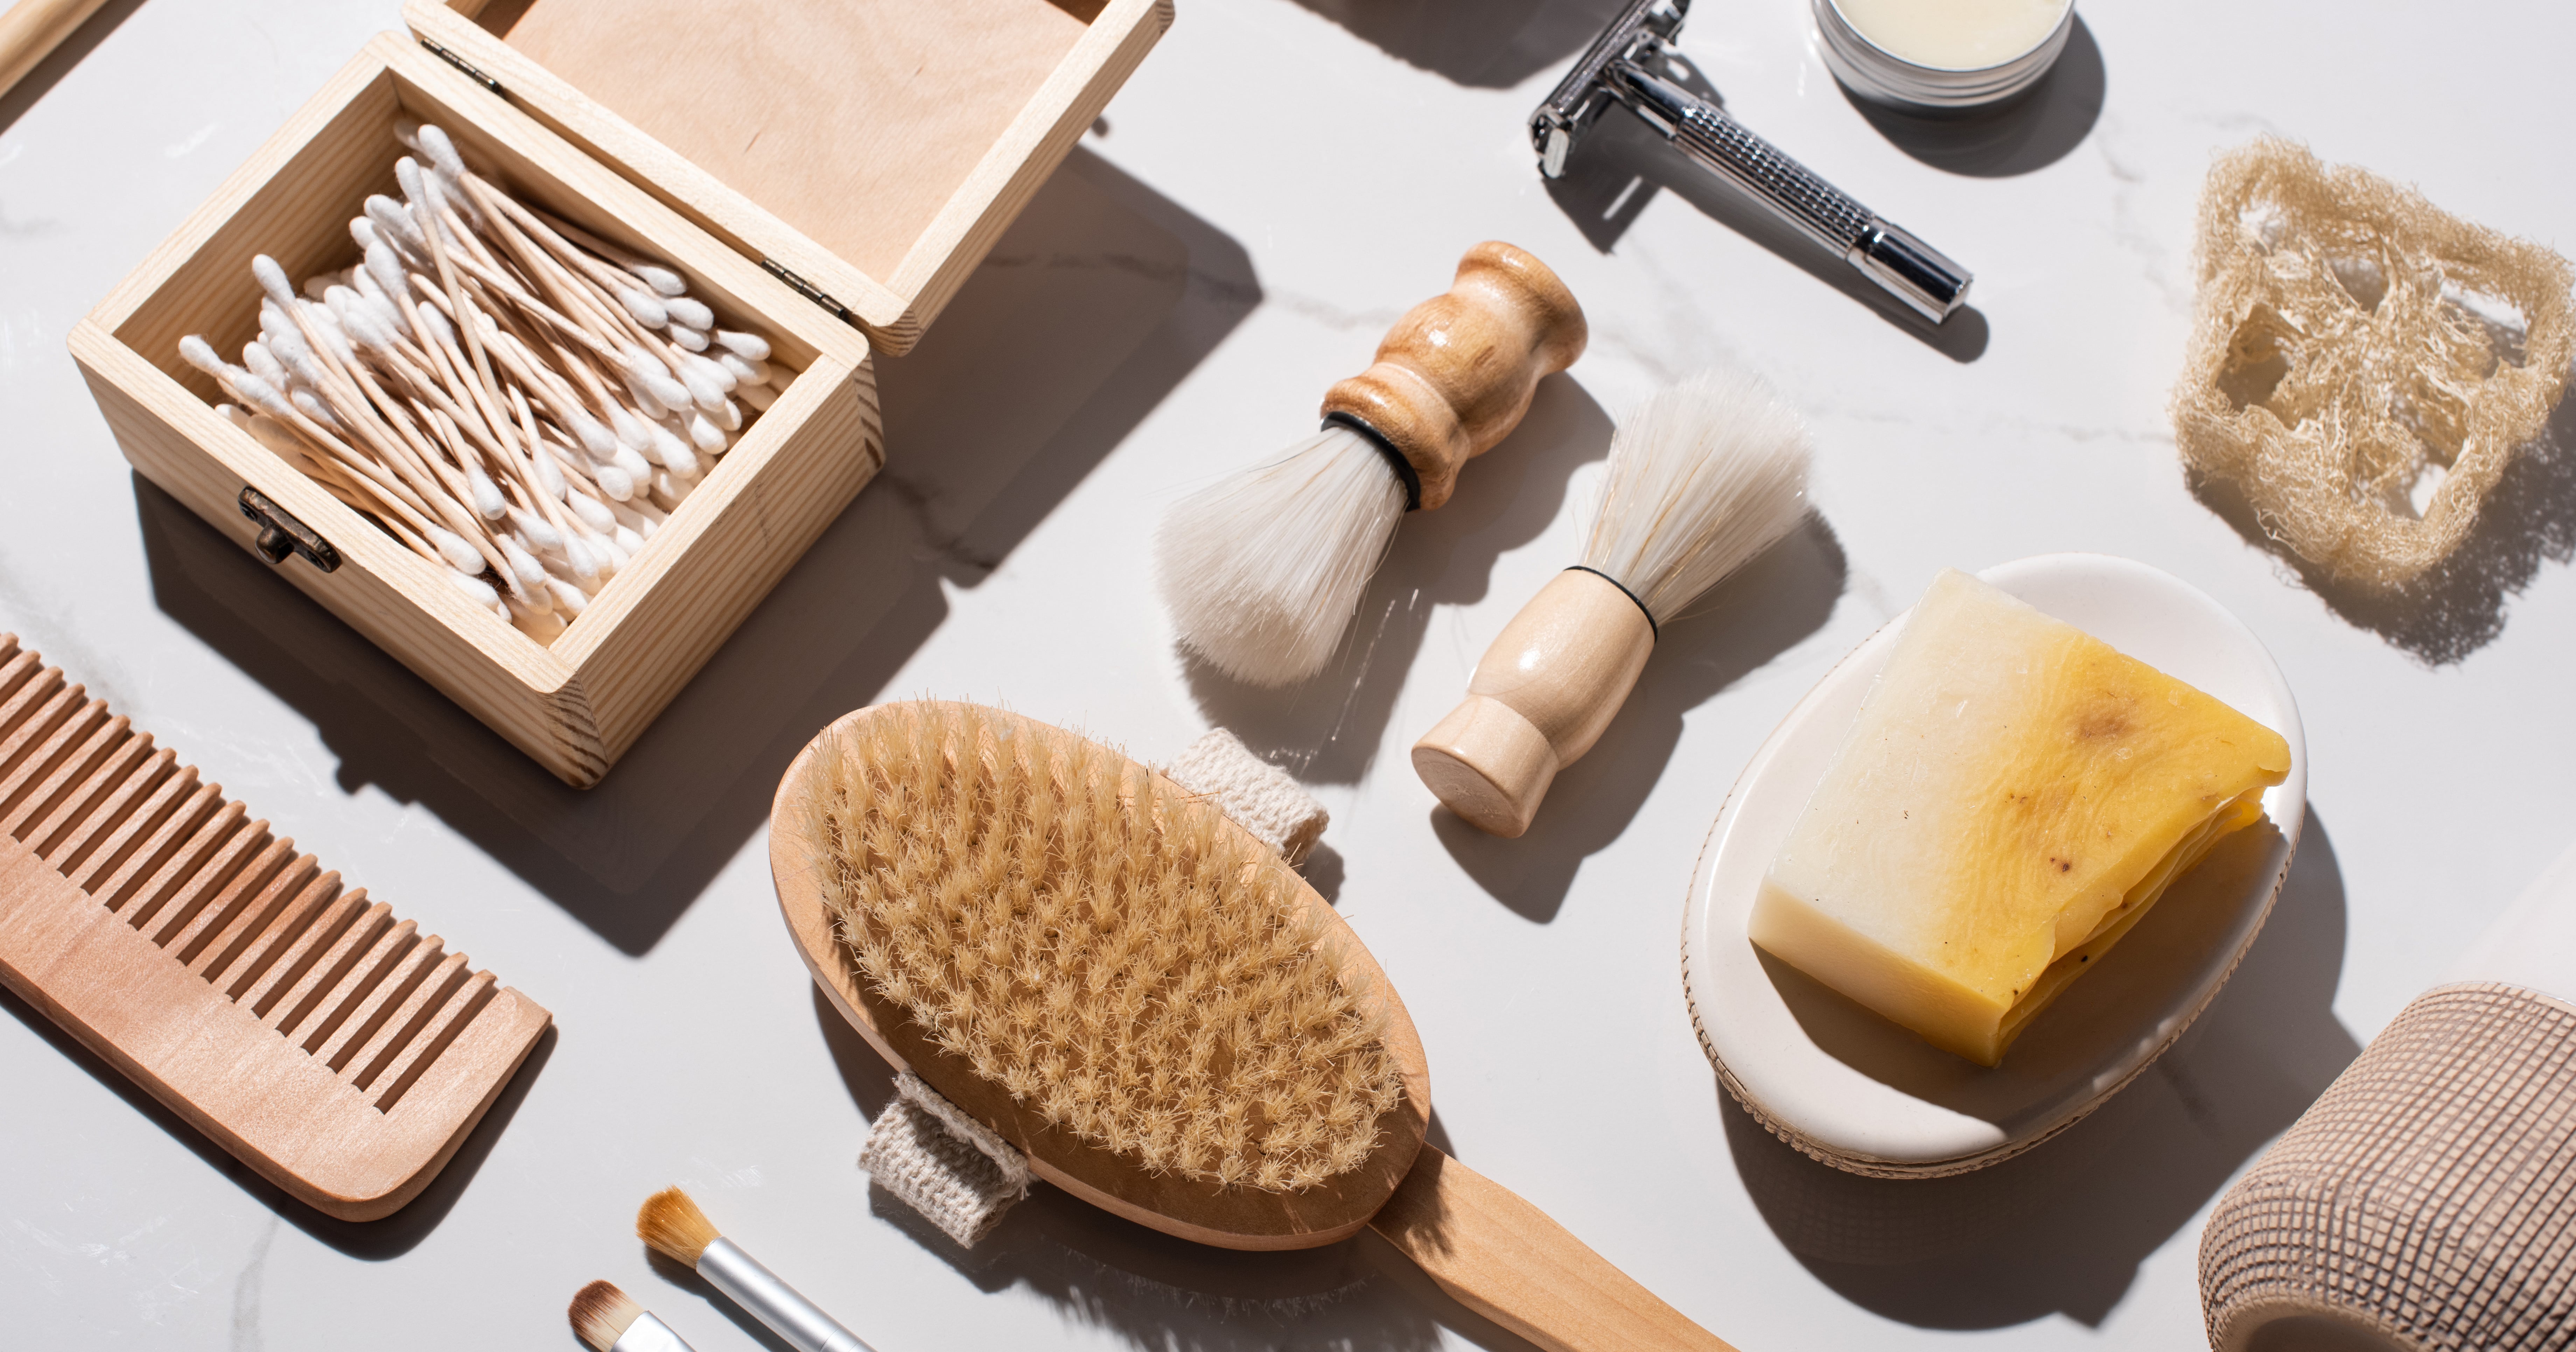 20 Sustainable Products to Add to Your Beauty Routine